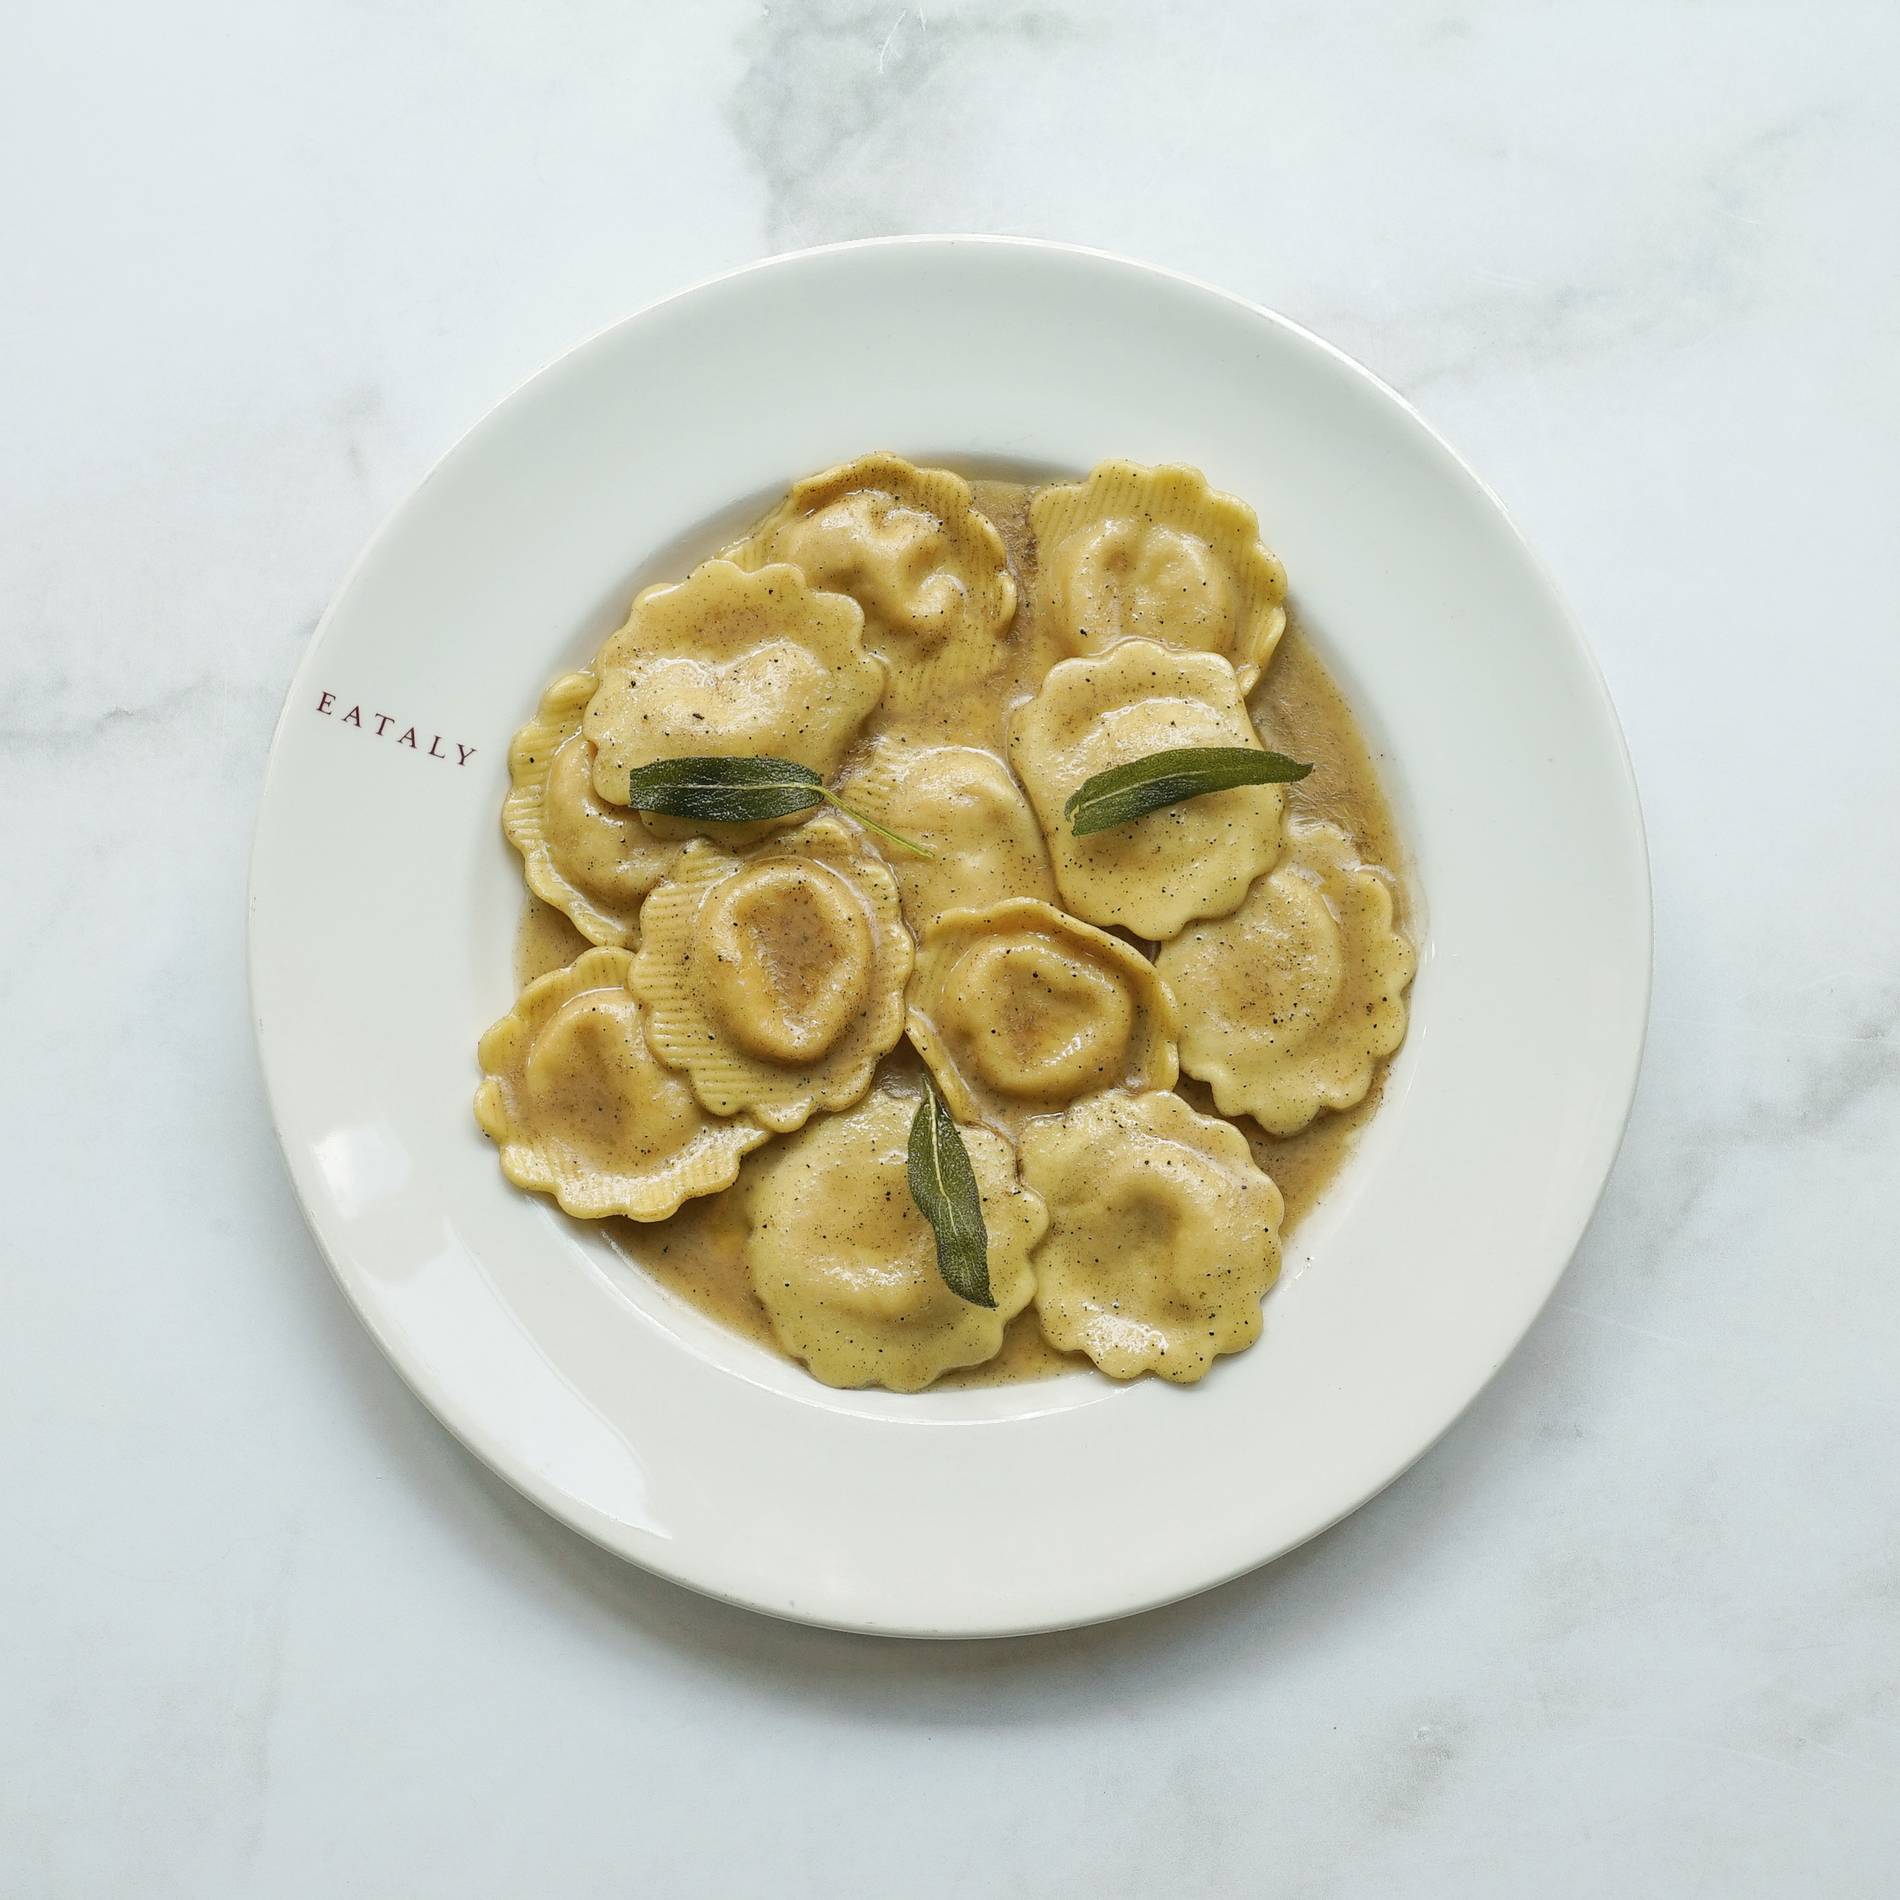 eataly squash ravioli with brown butter and sage sauce